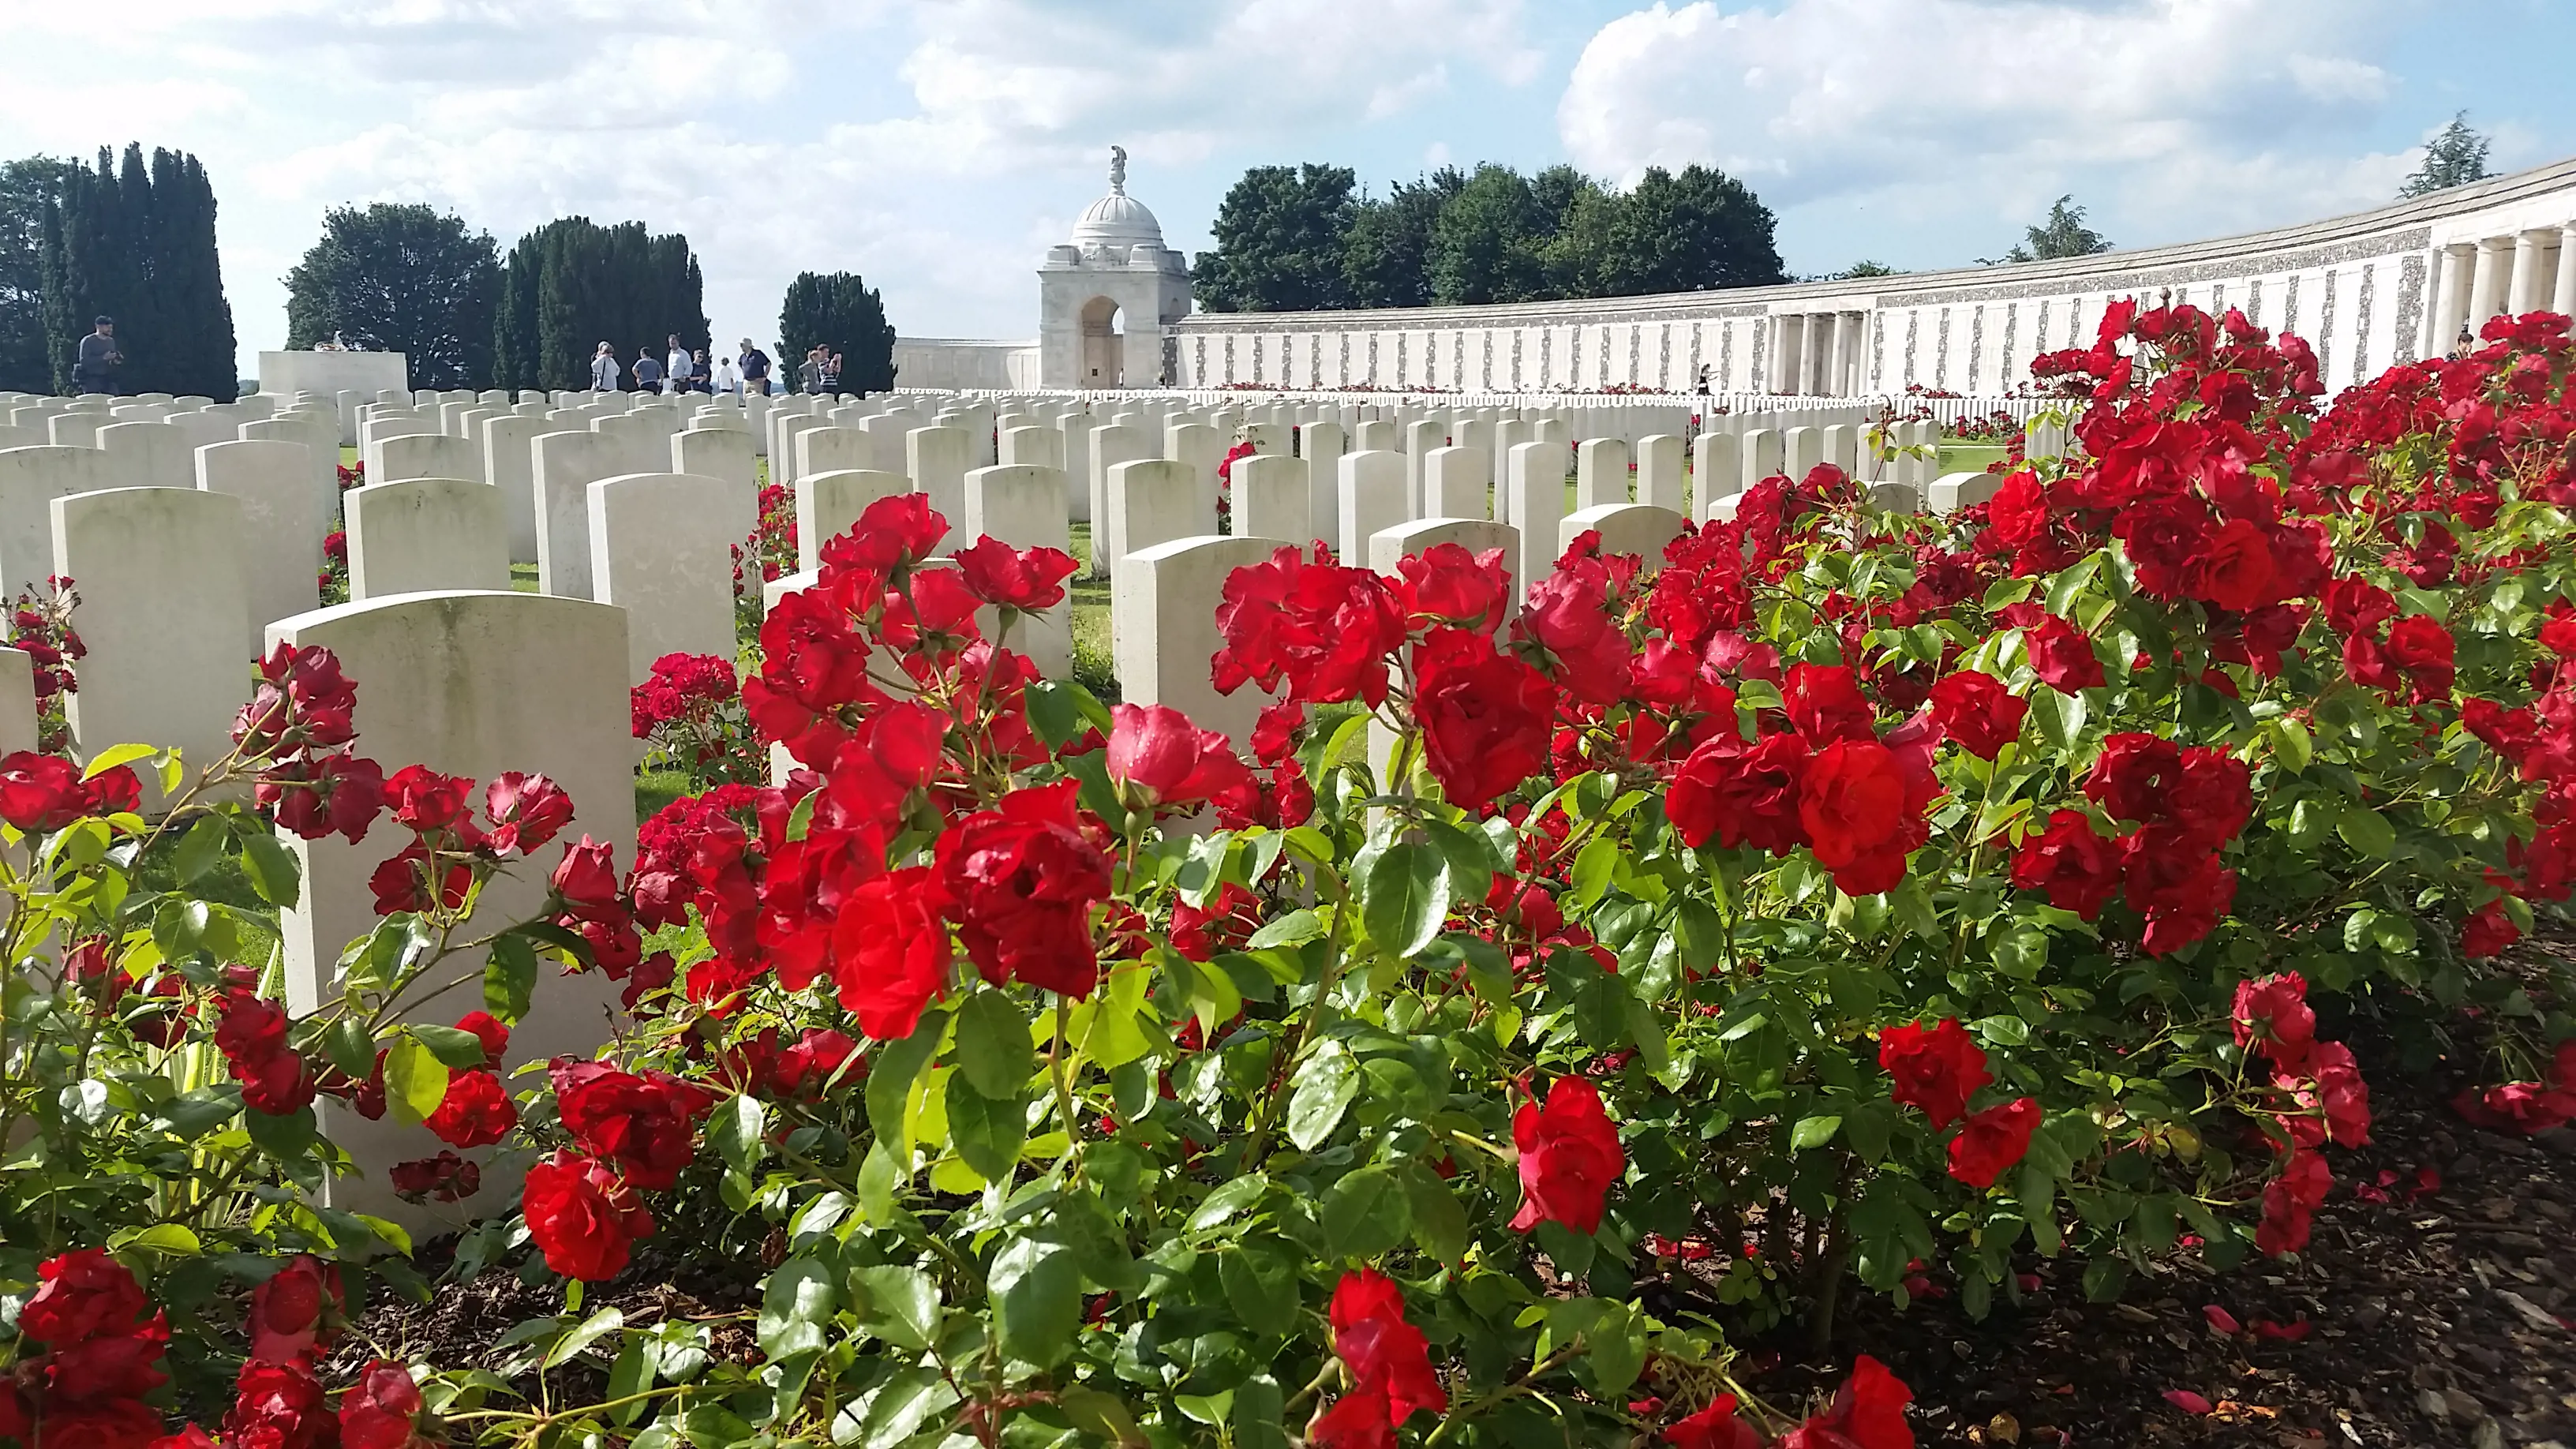 Tyne Cot Commonwealth War Graves Commission Cemetery